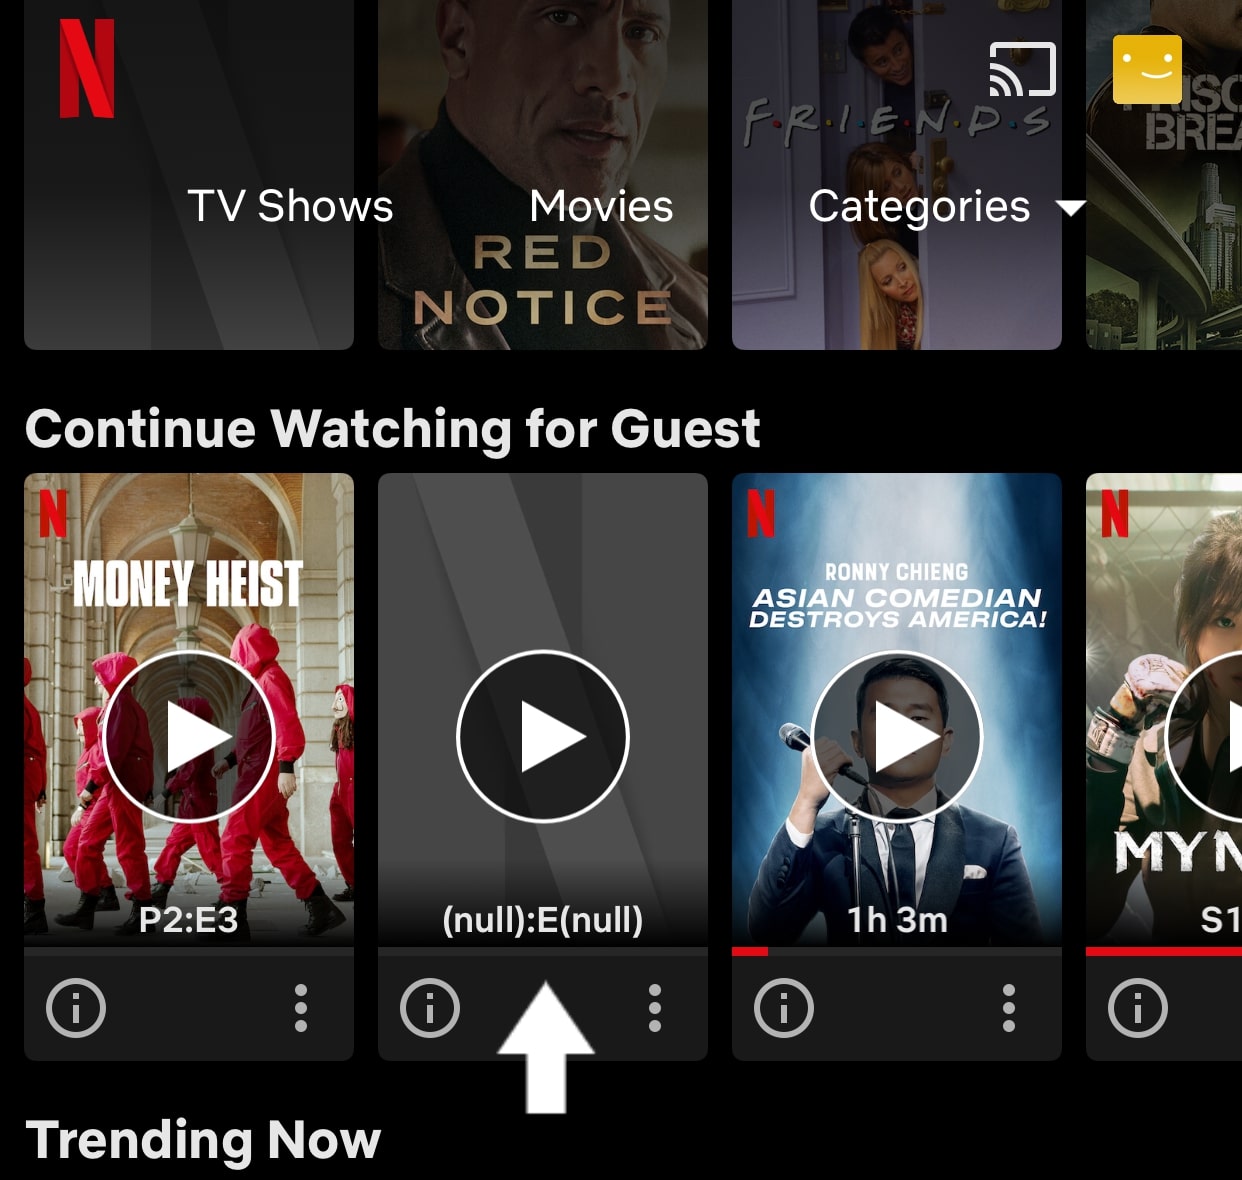 Netflix continue watching feature not working, showing, loading, or updating